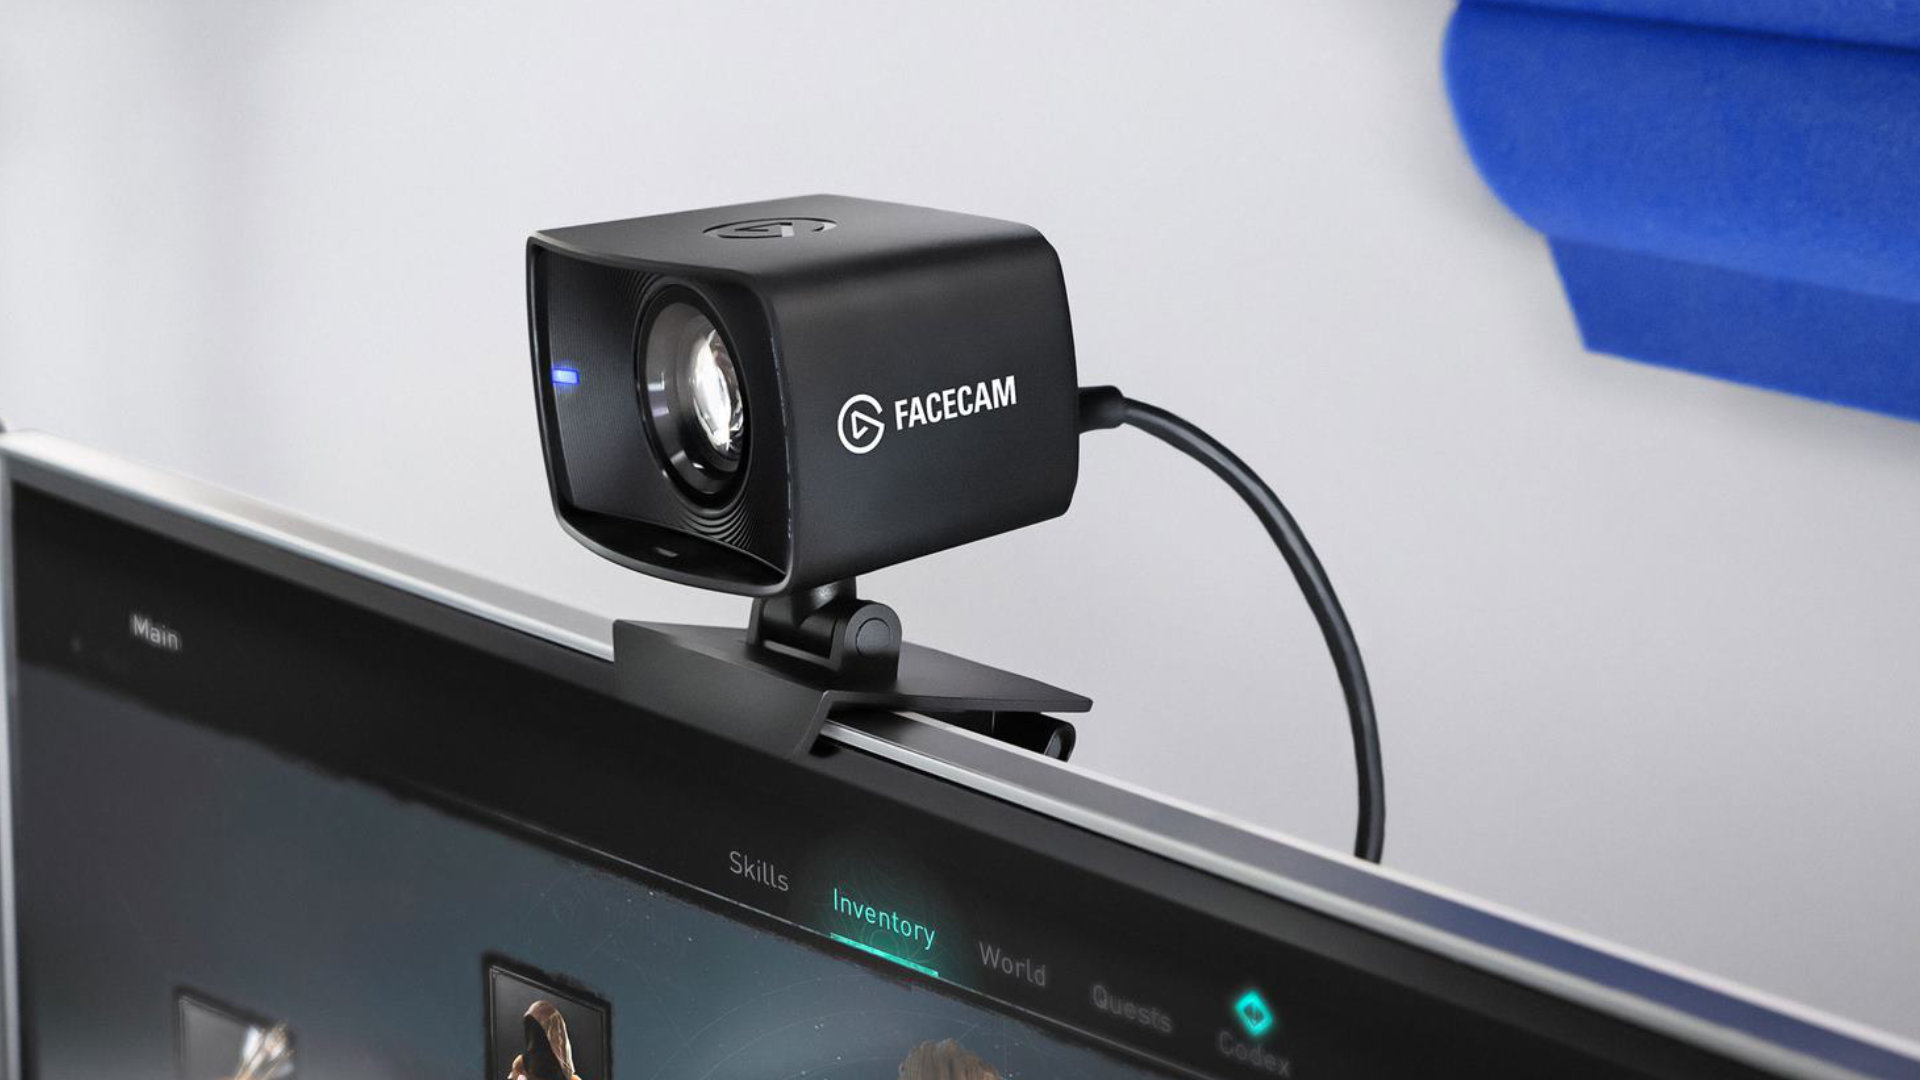 The best streaming webcam is the Elgato Facecam with its Stream Deck integration